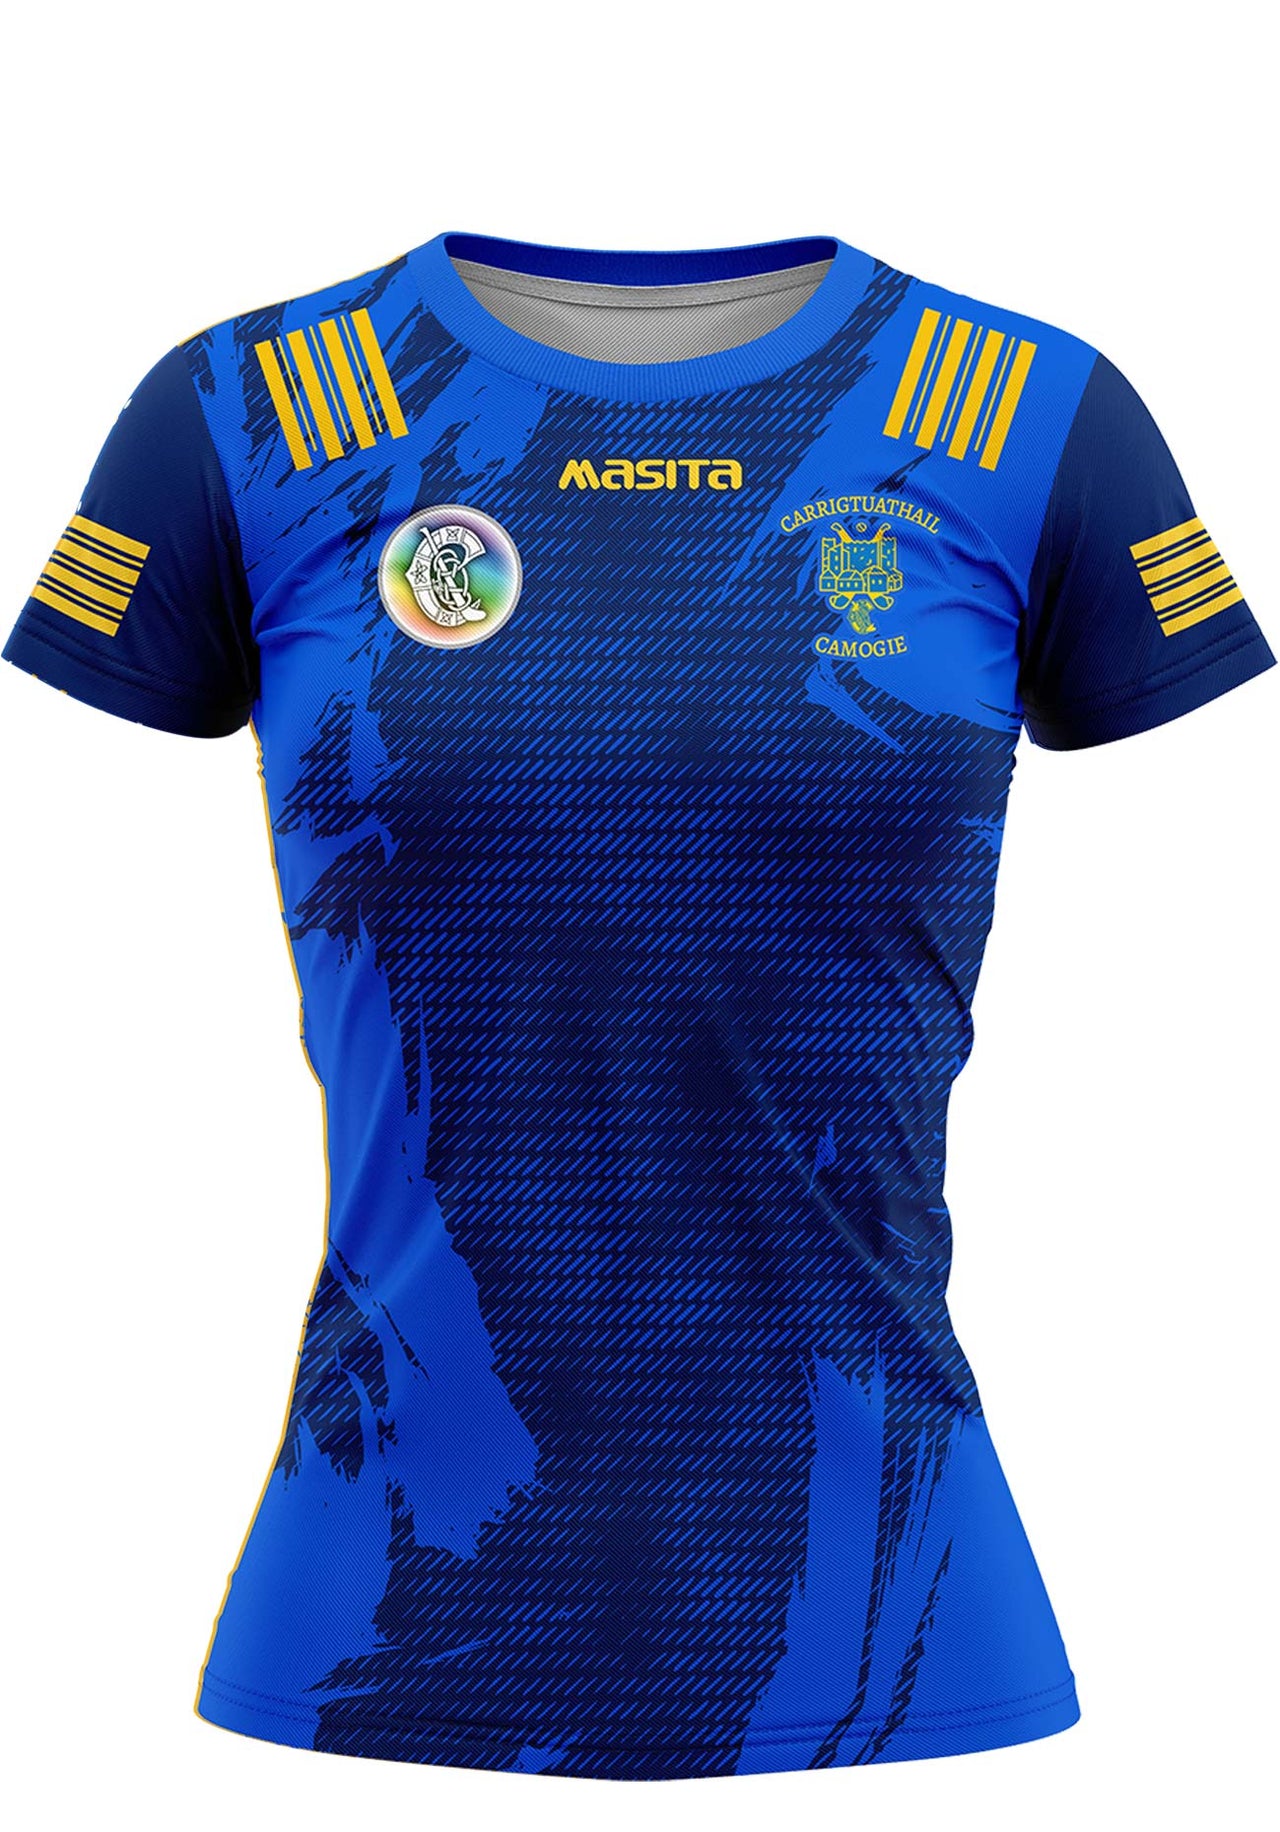 Carrigtwohill Camogie Training Jersey Player Fit Adult